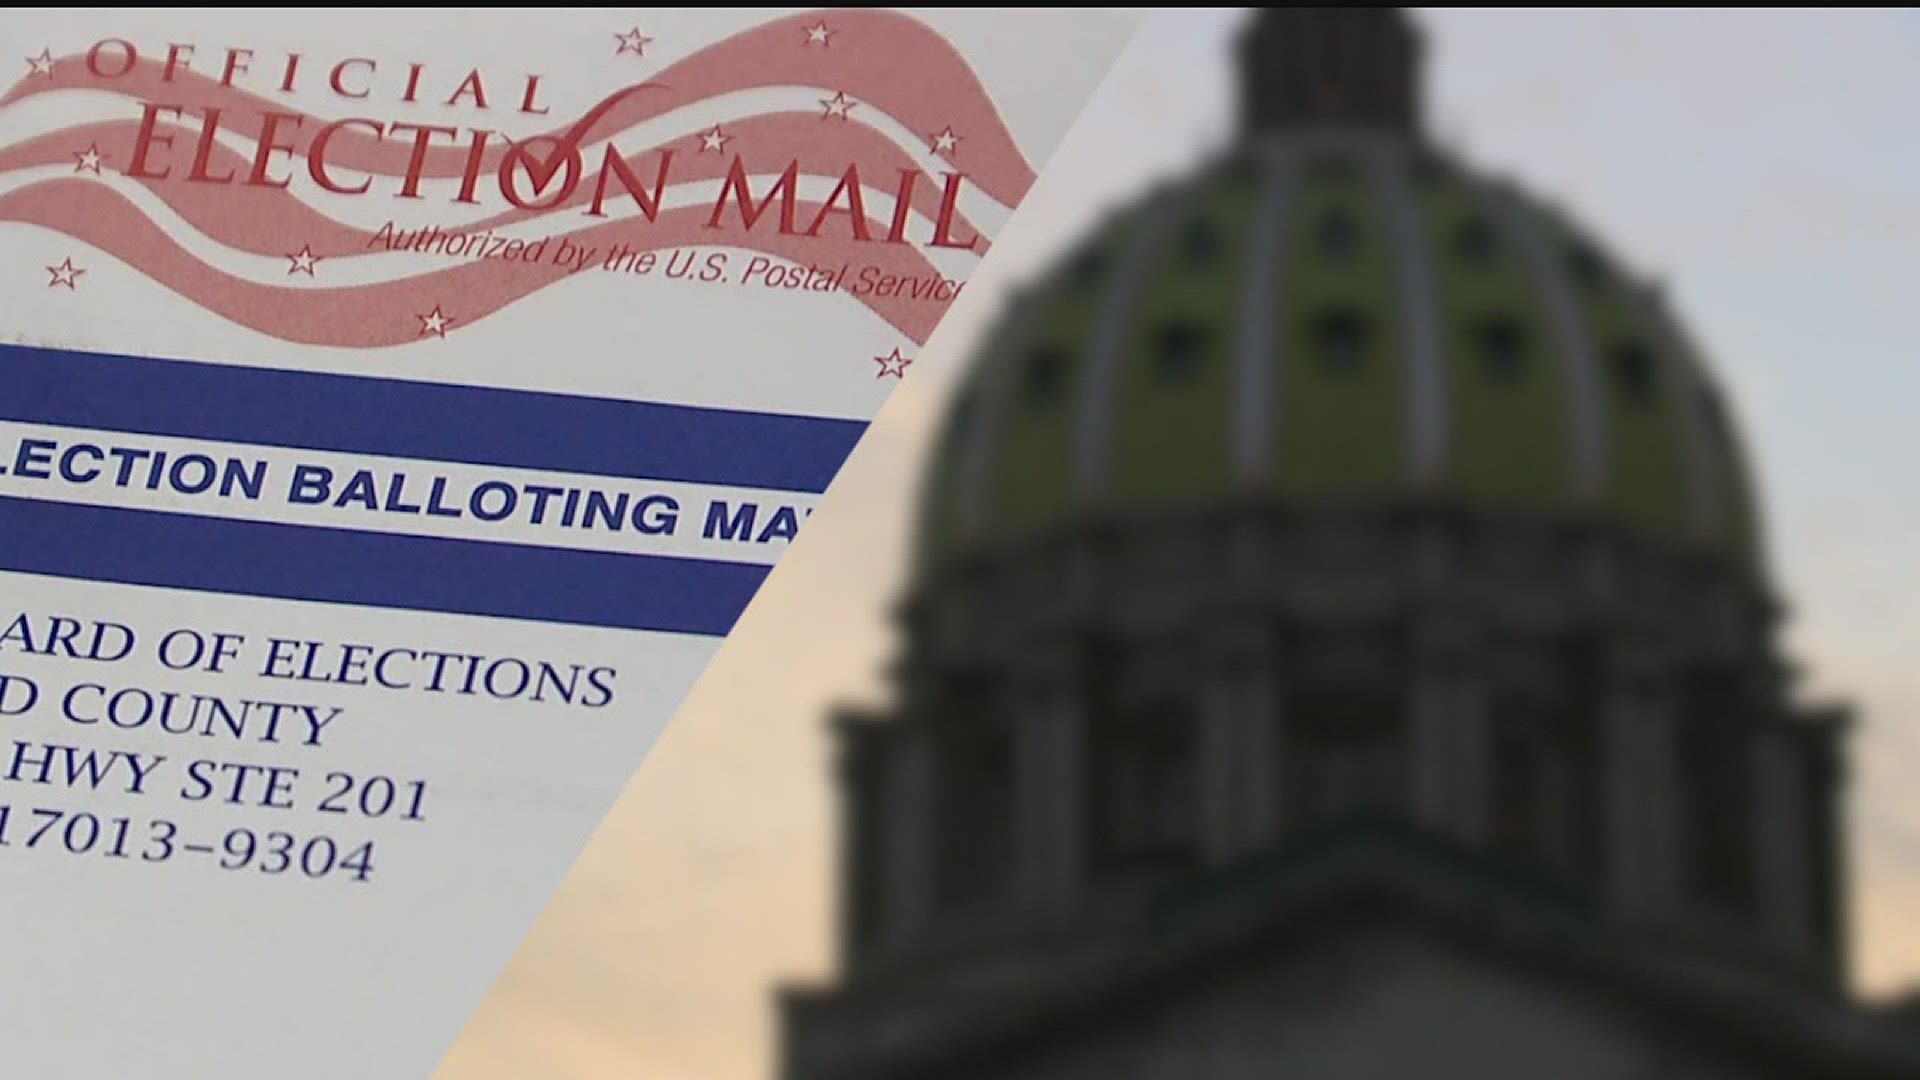 All Pennsylvanian voters are encouraged to vote by mail for the June 2 primary election, election officials said during an election update on May 4.